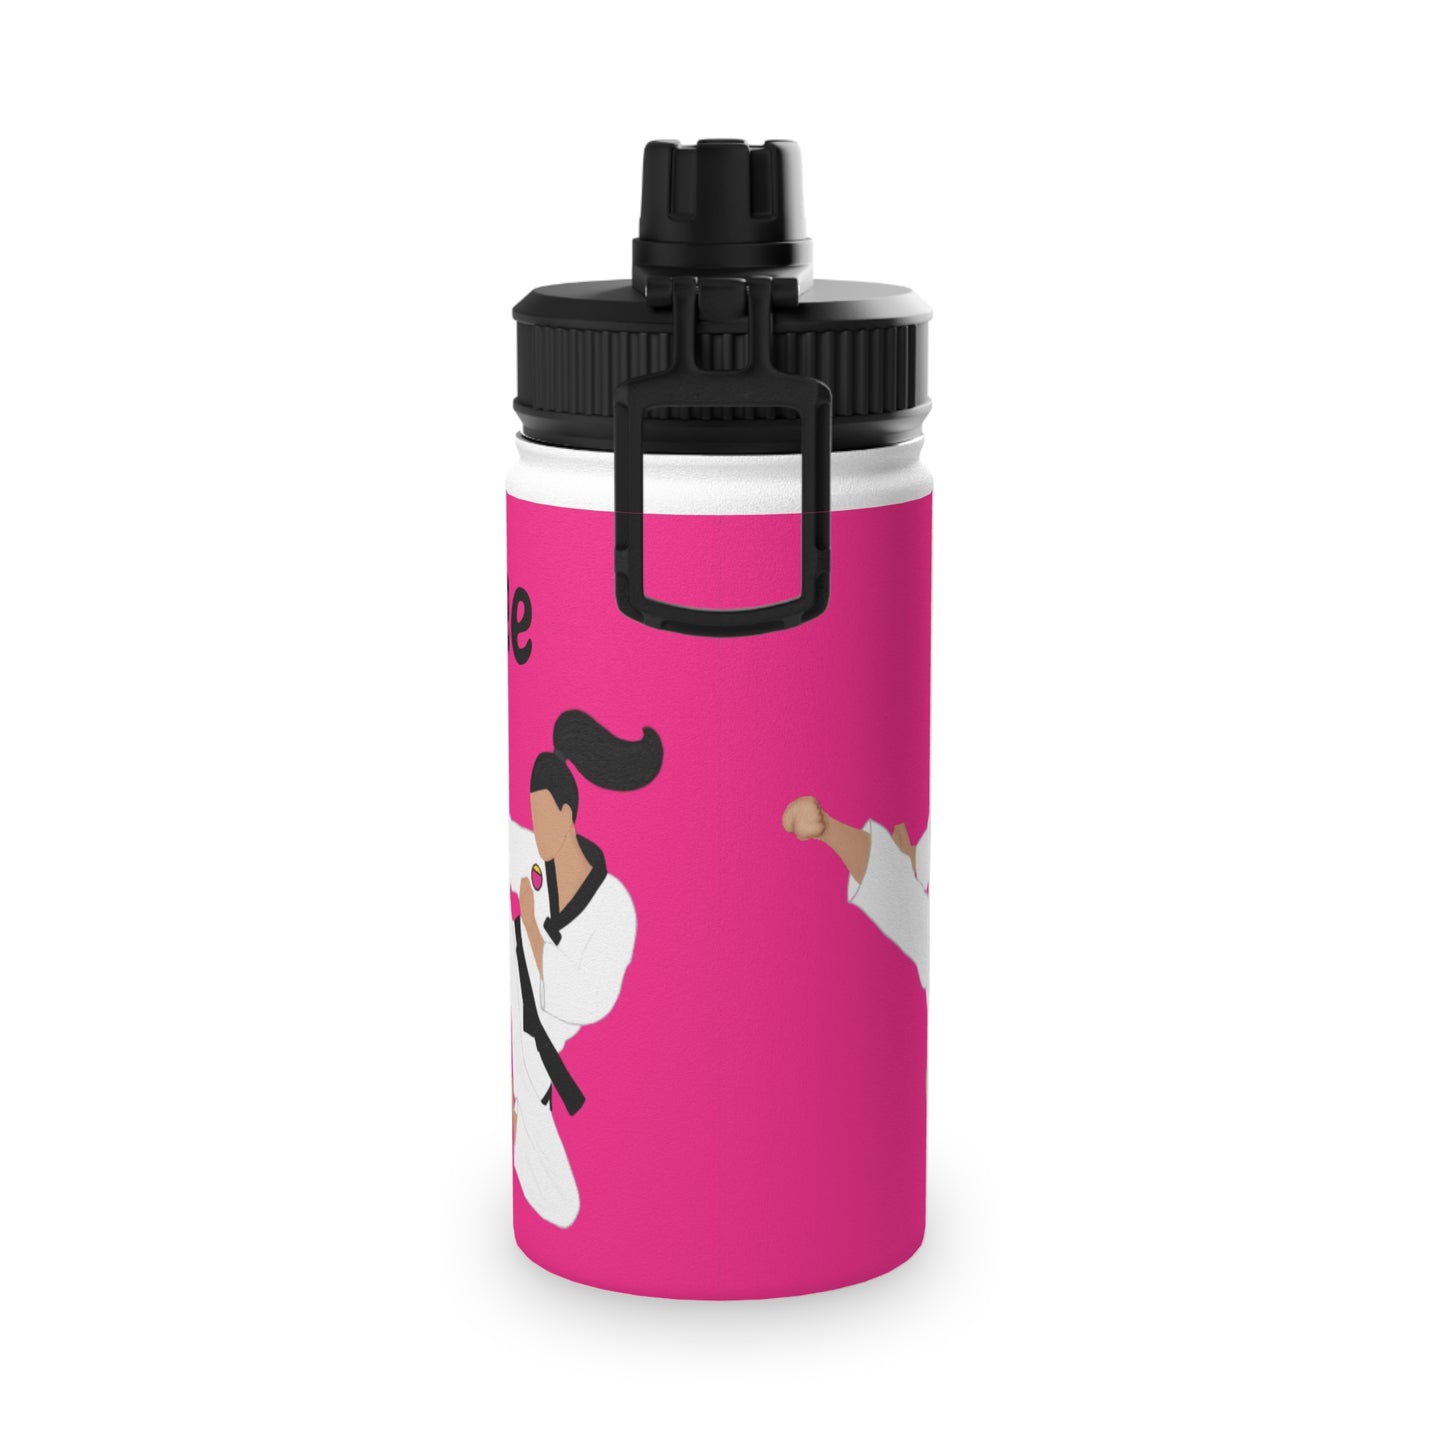 Active Cutie Martial Arts Taekwondo Stainless Steel Water Bottle (PICK YOUR SKIN TONE)